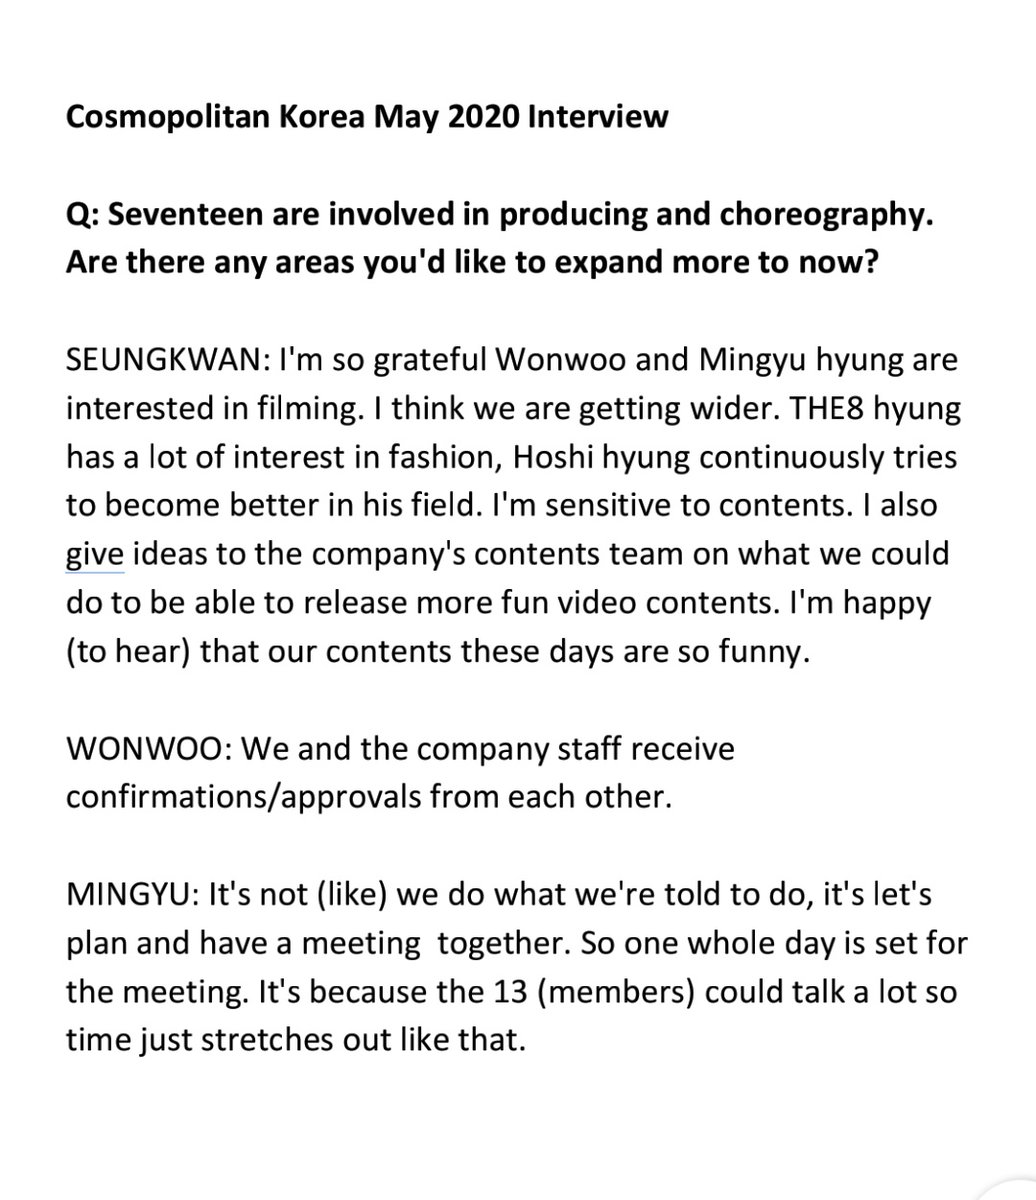 Cosmopolitan Korea Q: Seventeen in involved in Producing and choreography. Are there any areas youd like to expand more to now?SEUNGKWAN: I'm so grateful Wonwoo are Mingyu hyung are interested in filming. I think we are getting wider. -cont.